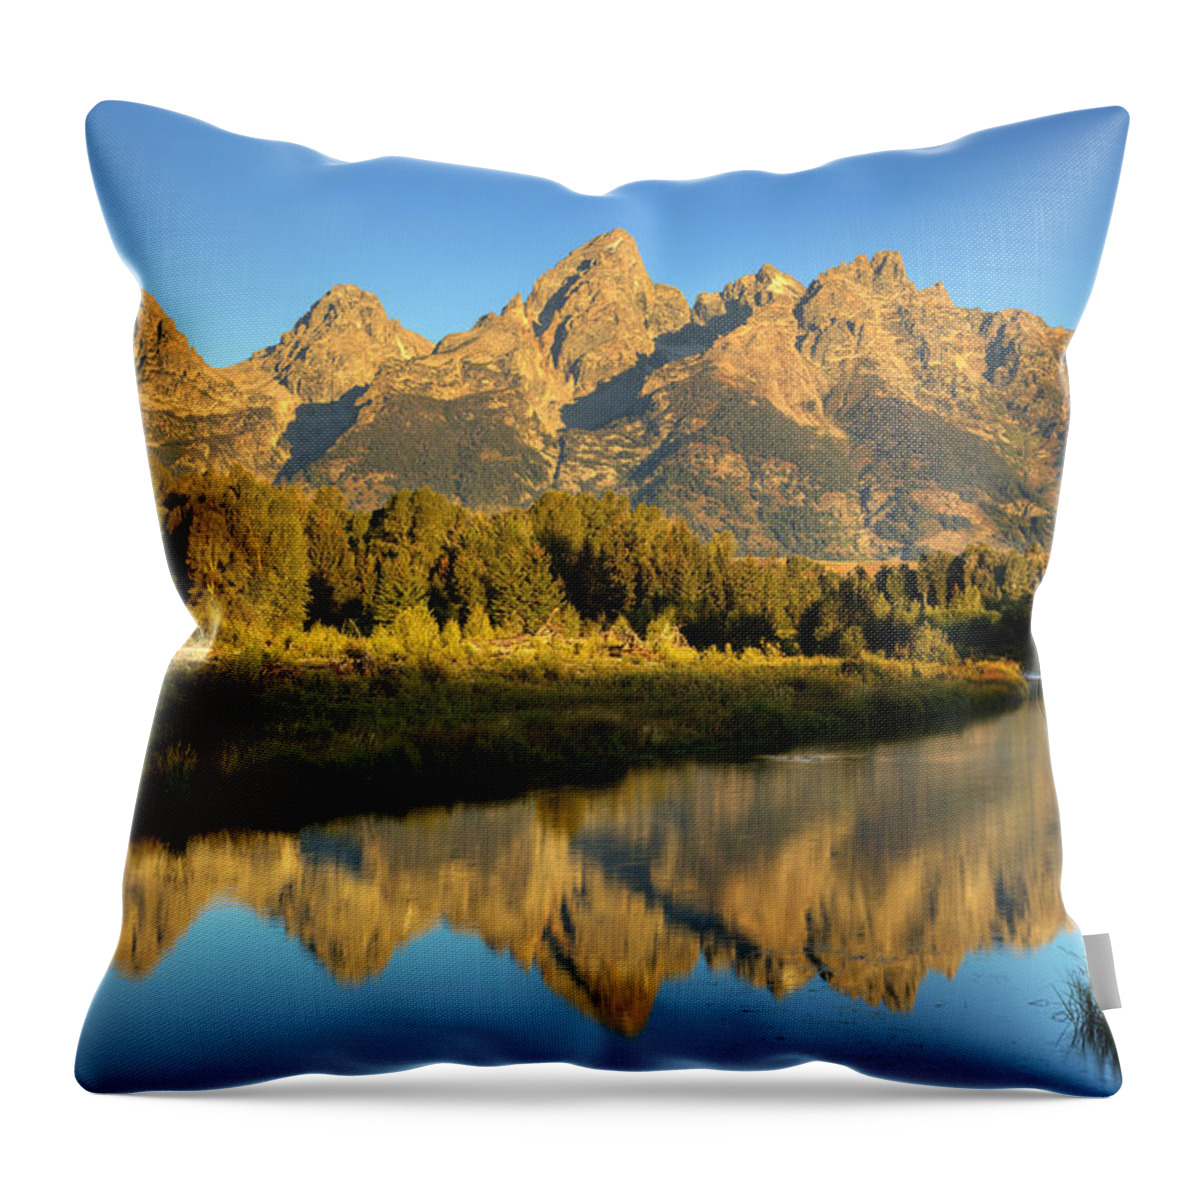 Mountains Throw Pillow featuring the photograph Grand Teton #1 by Alan Vance Ley